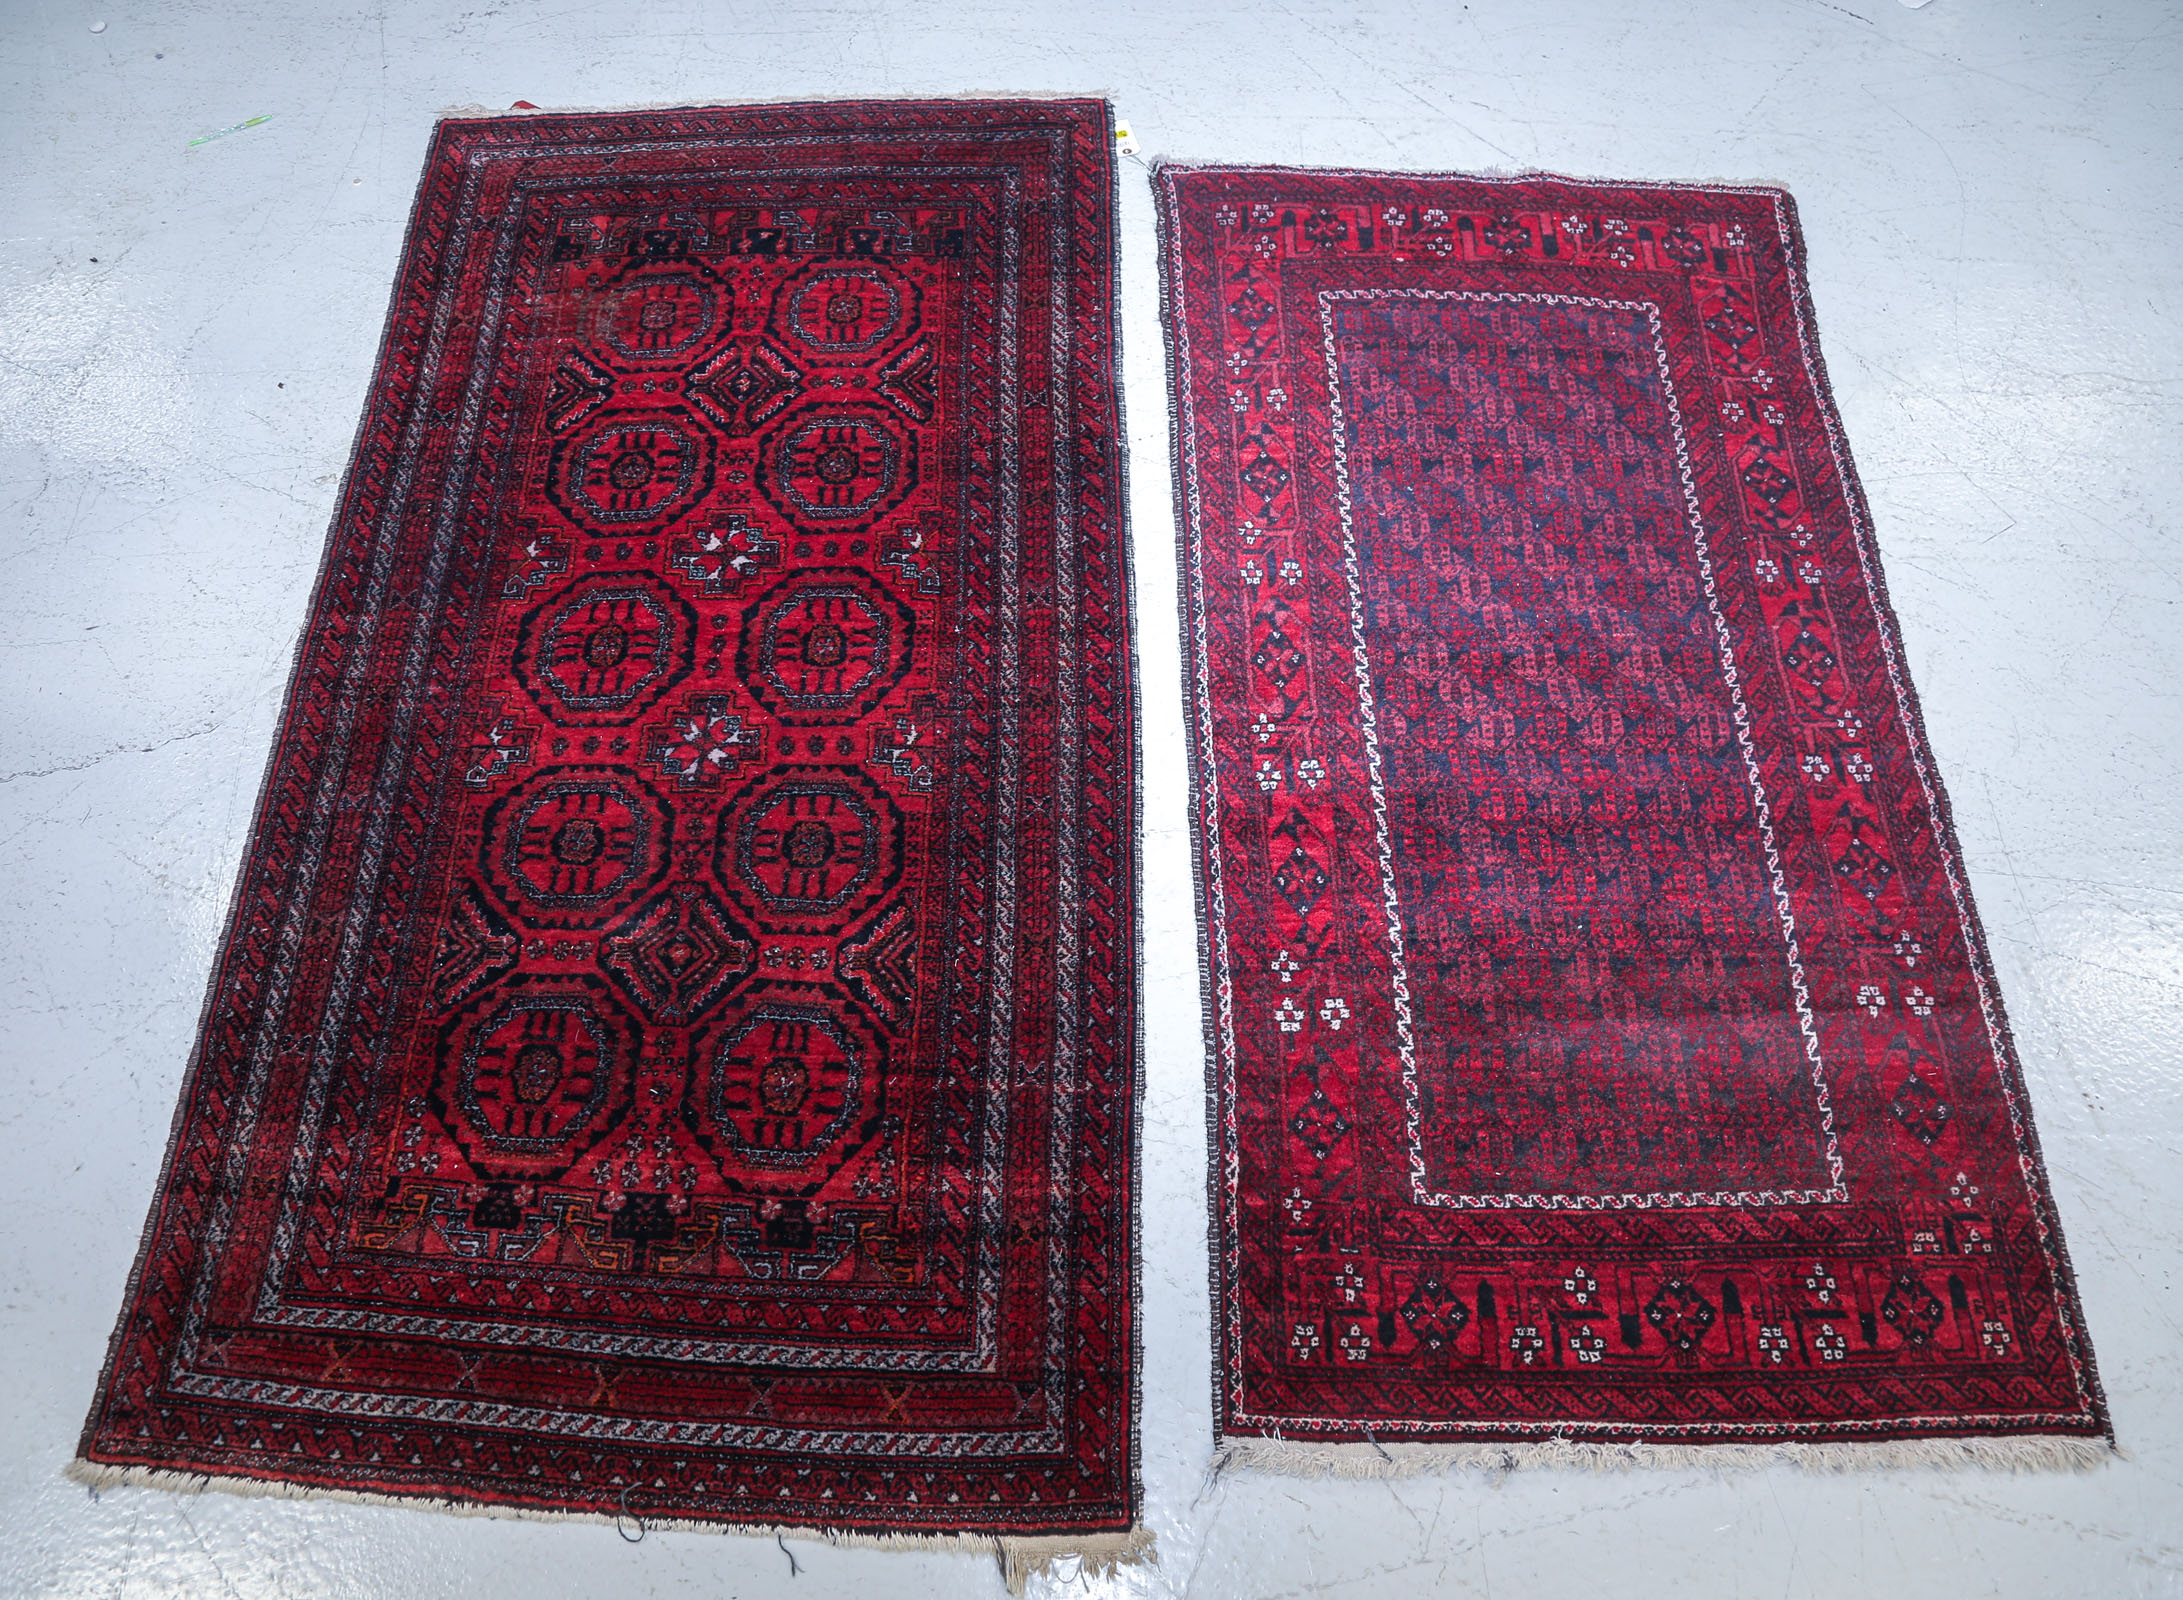 TWO BALOUCH RUGS AFGHANISTAN  3c770d